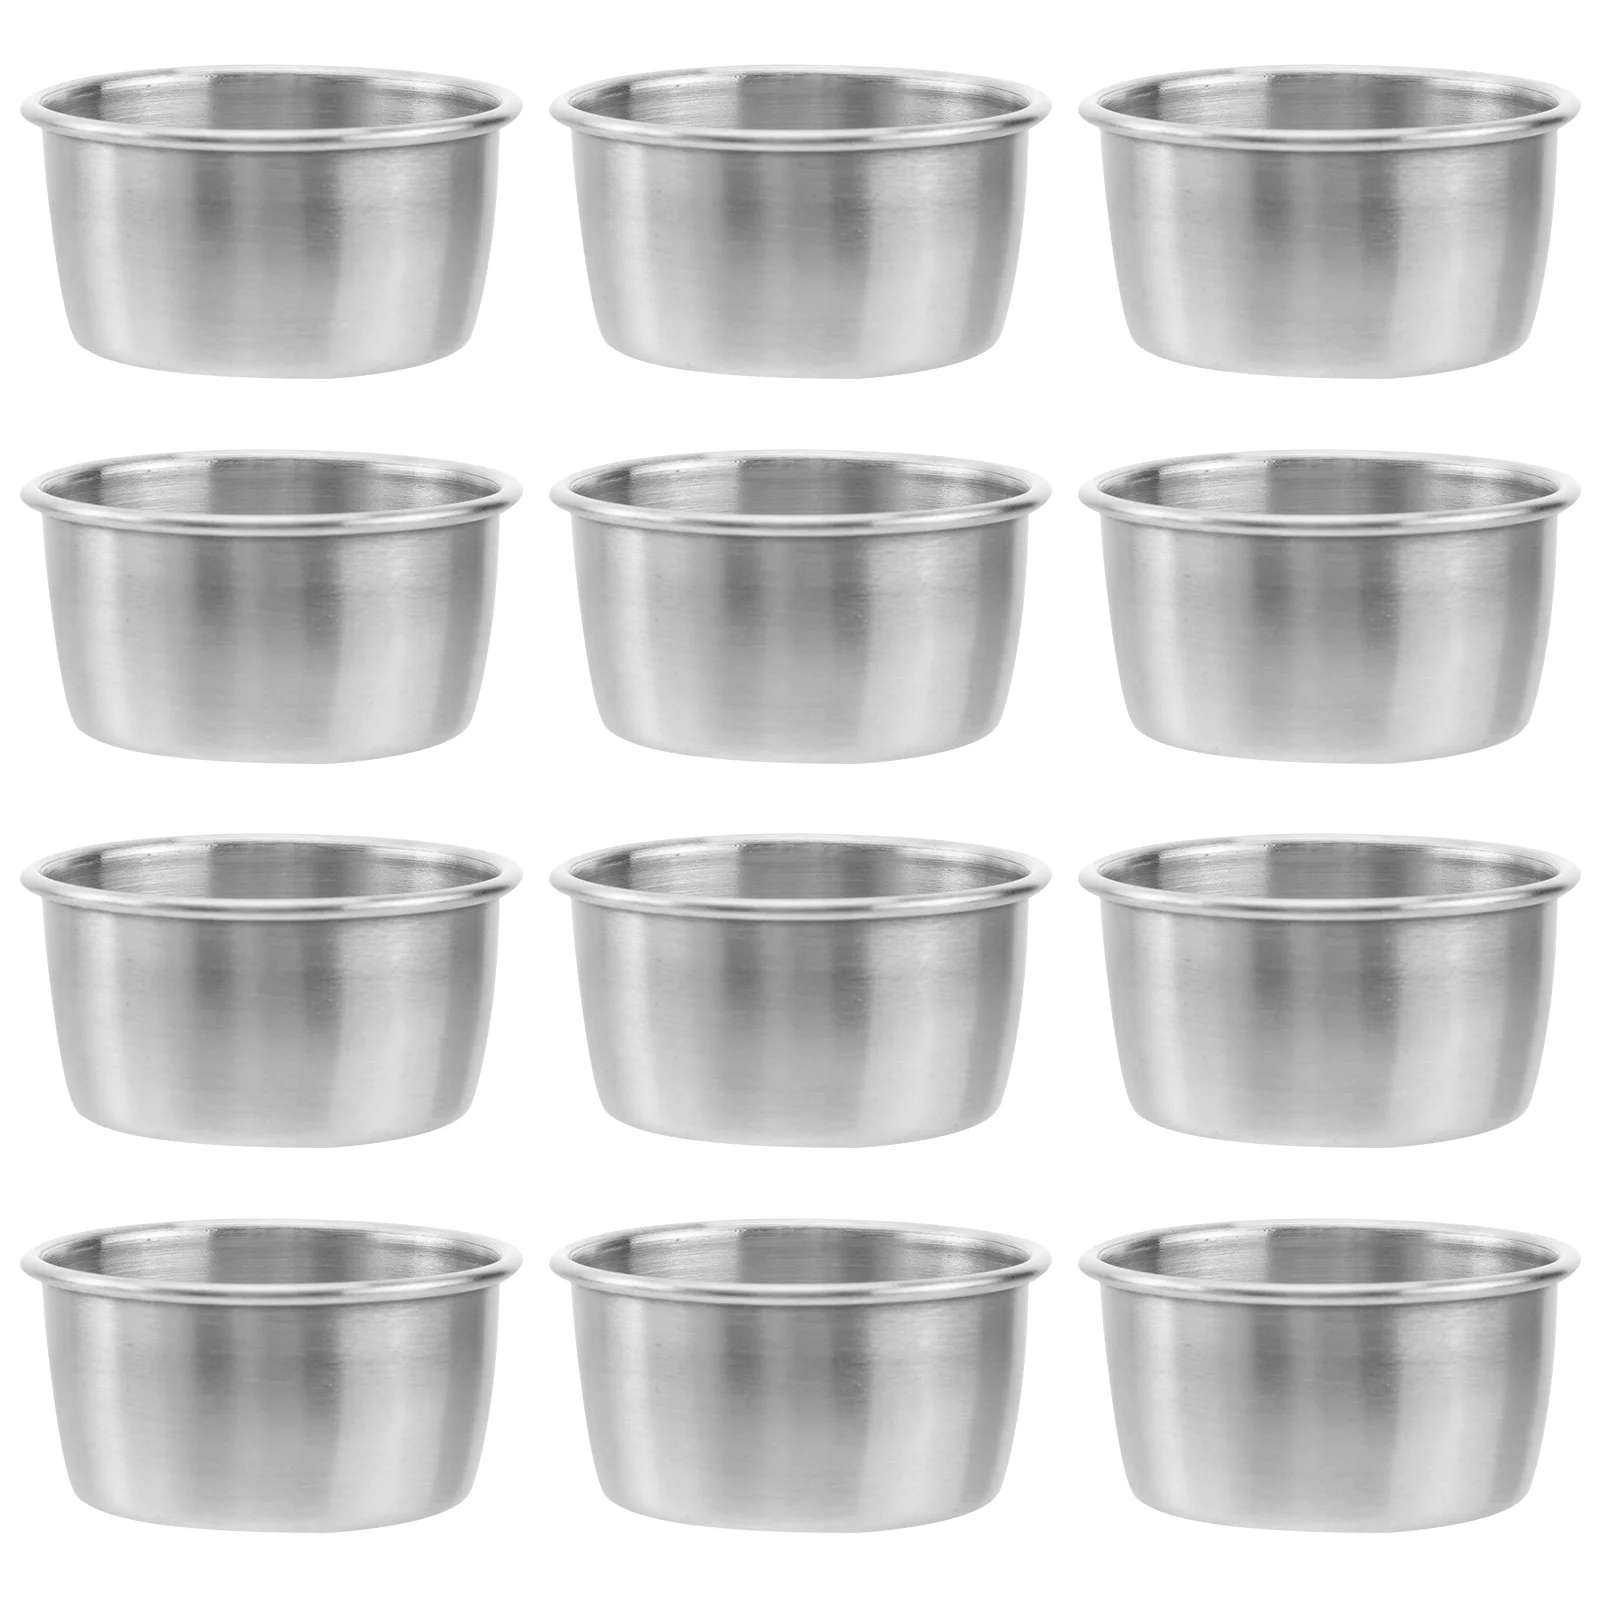 

12 Pcs Tomato Support Metal Side Dishes Ramekins Round Sauce Cup Saucer Bowl Dipping Condiment Holder Individual Favor Vinegar